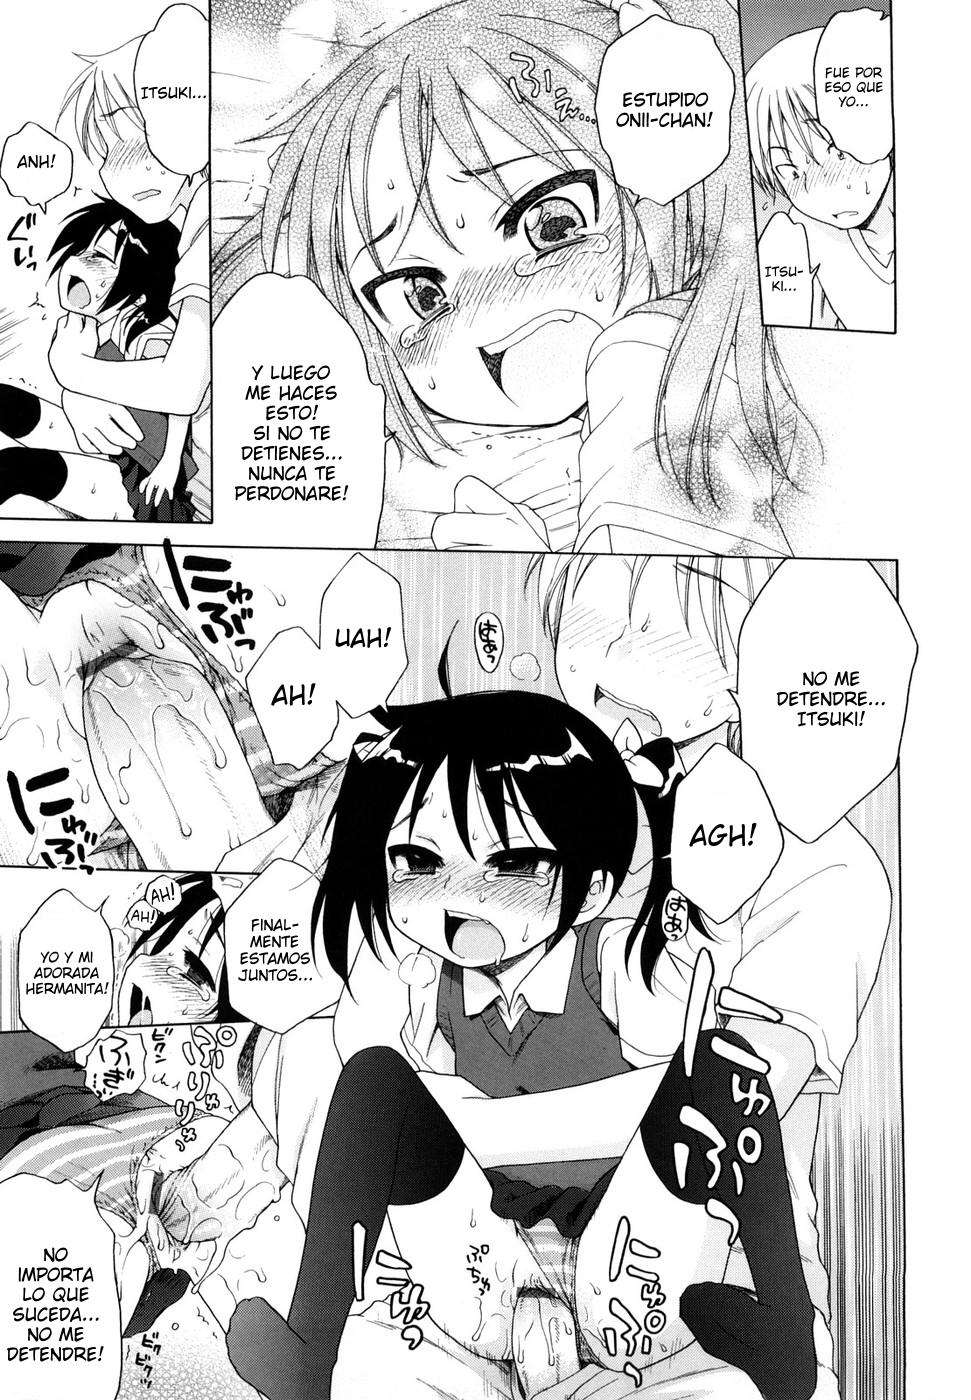 Me gustas Onii-chan! Chapter-4 - 14